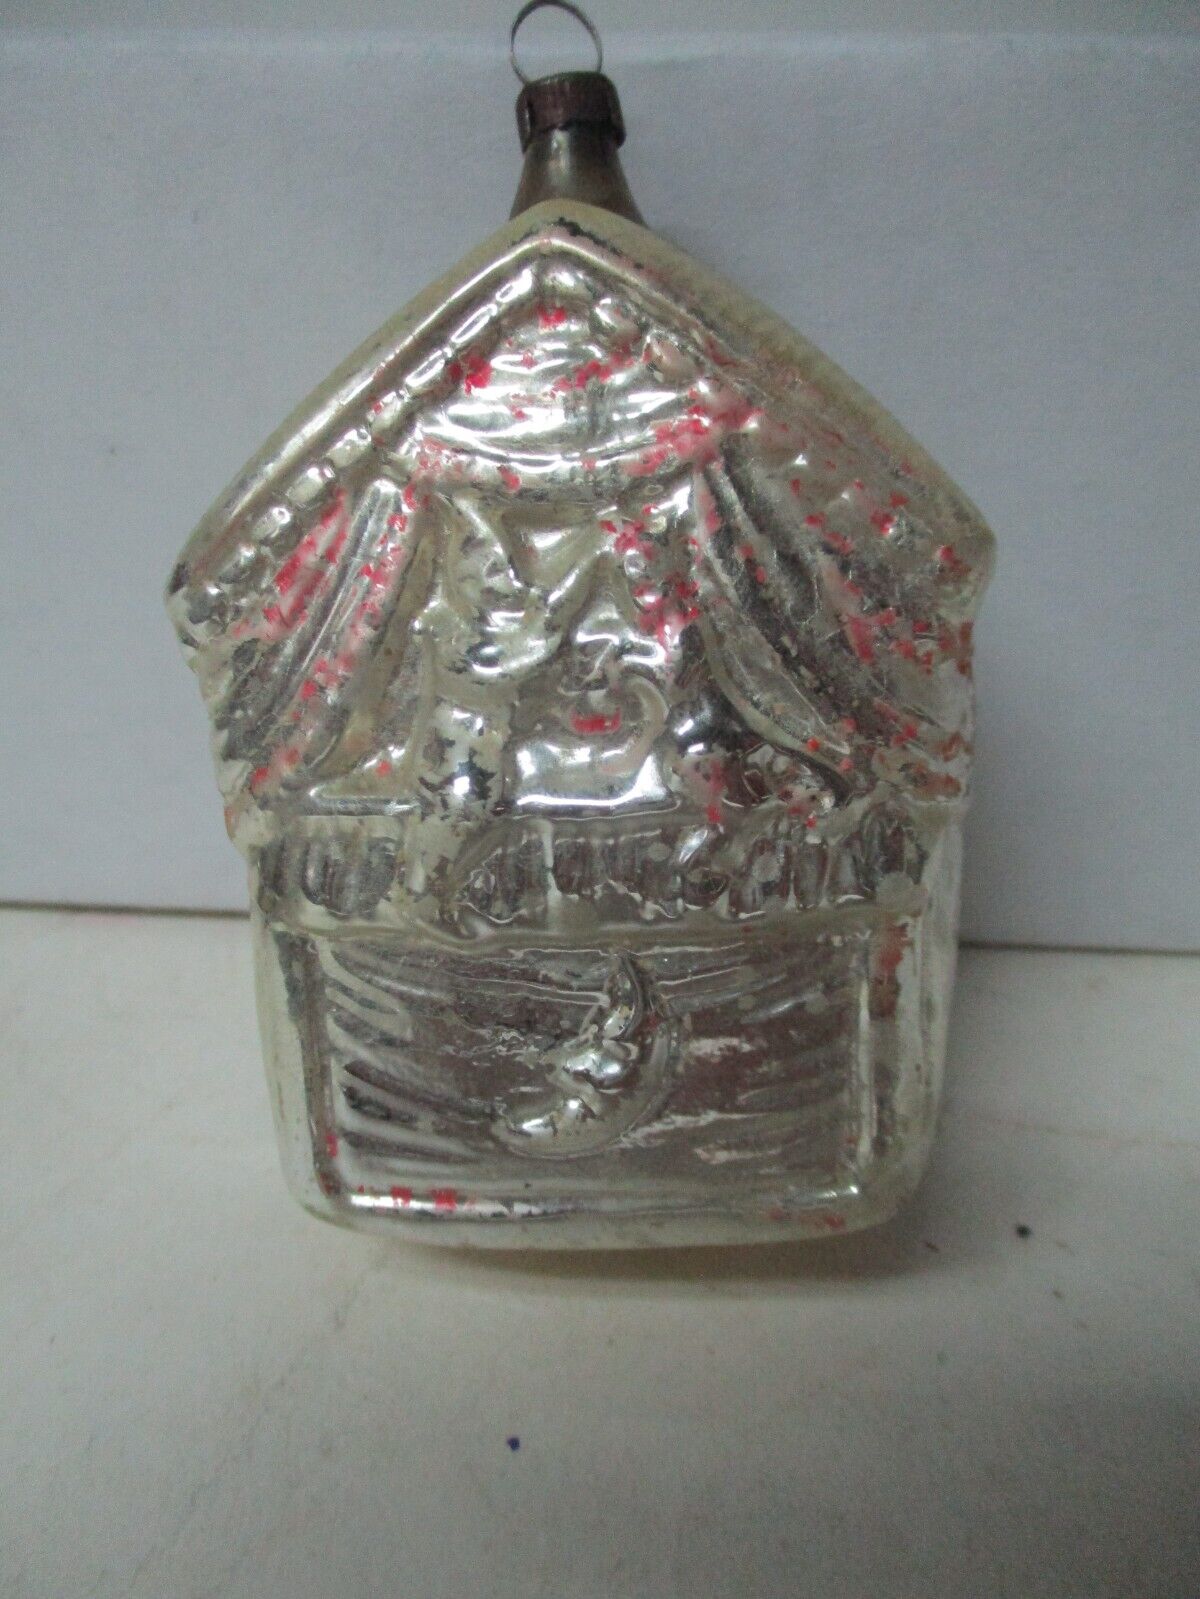 Very Old Glass Christmas Ornament - Punch & Judy Puppet Show